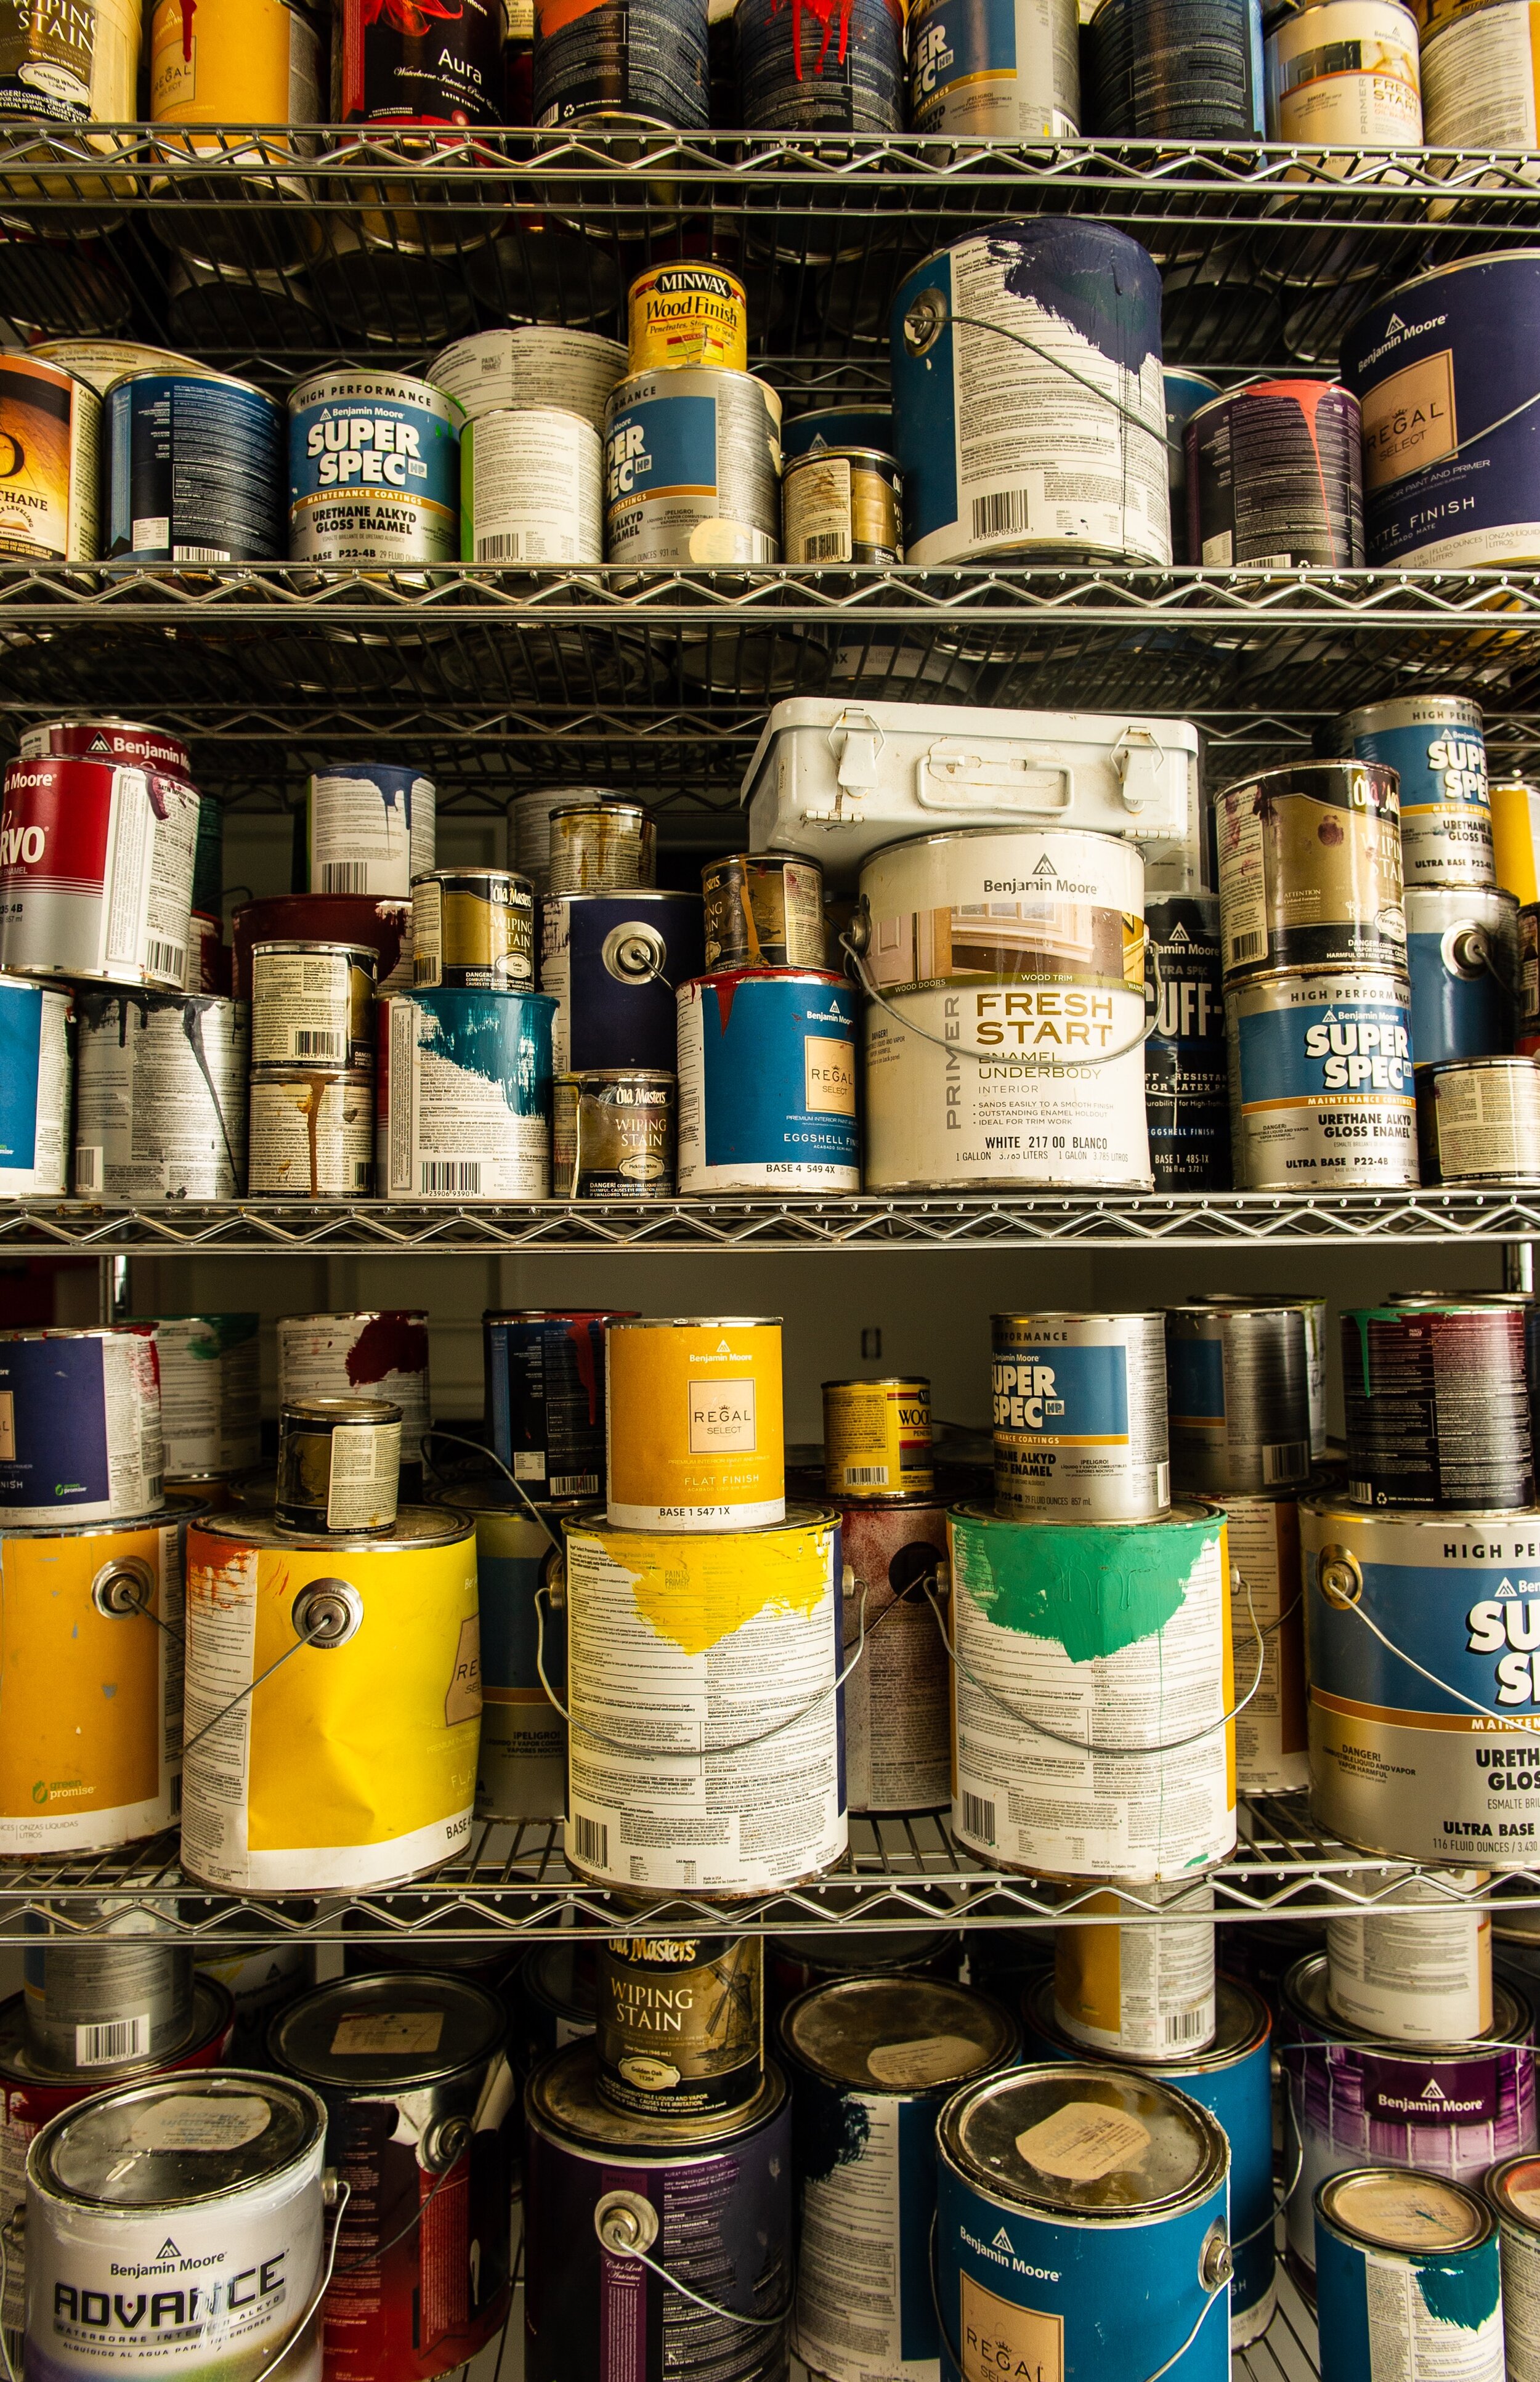 How to Dispose of Old Paint